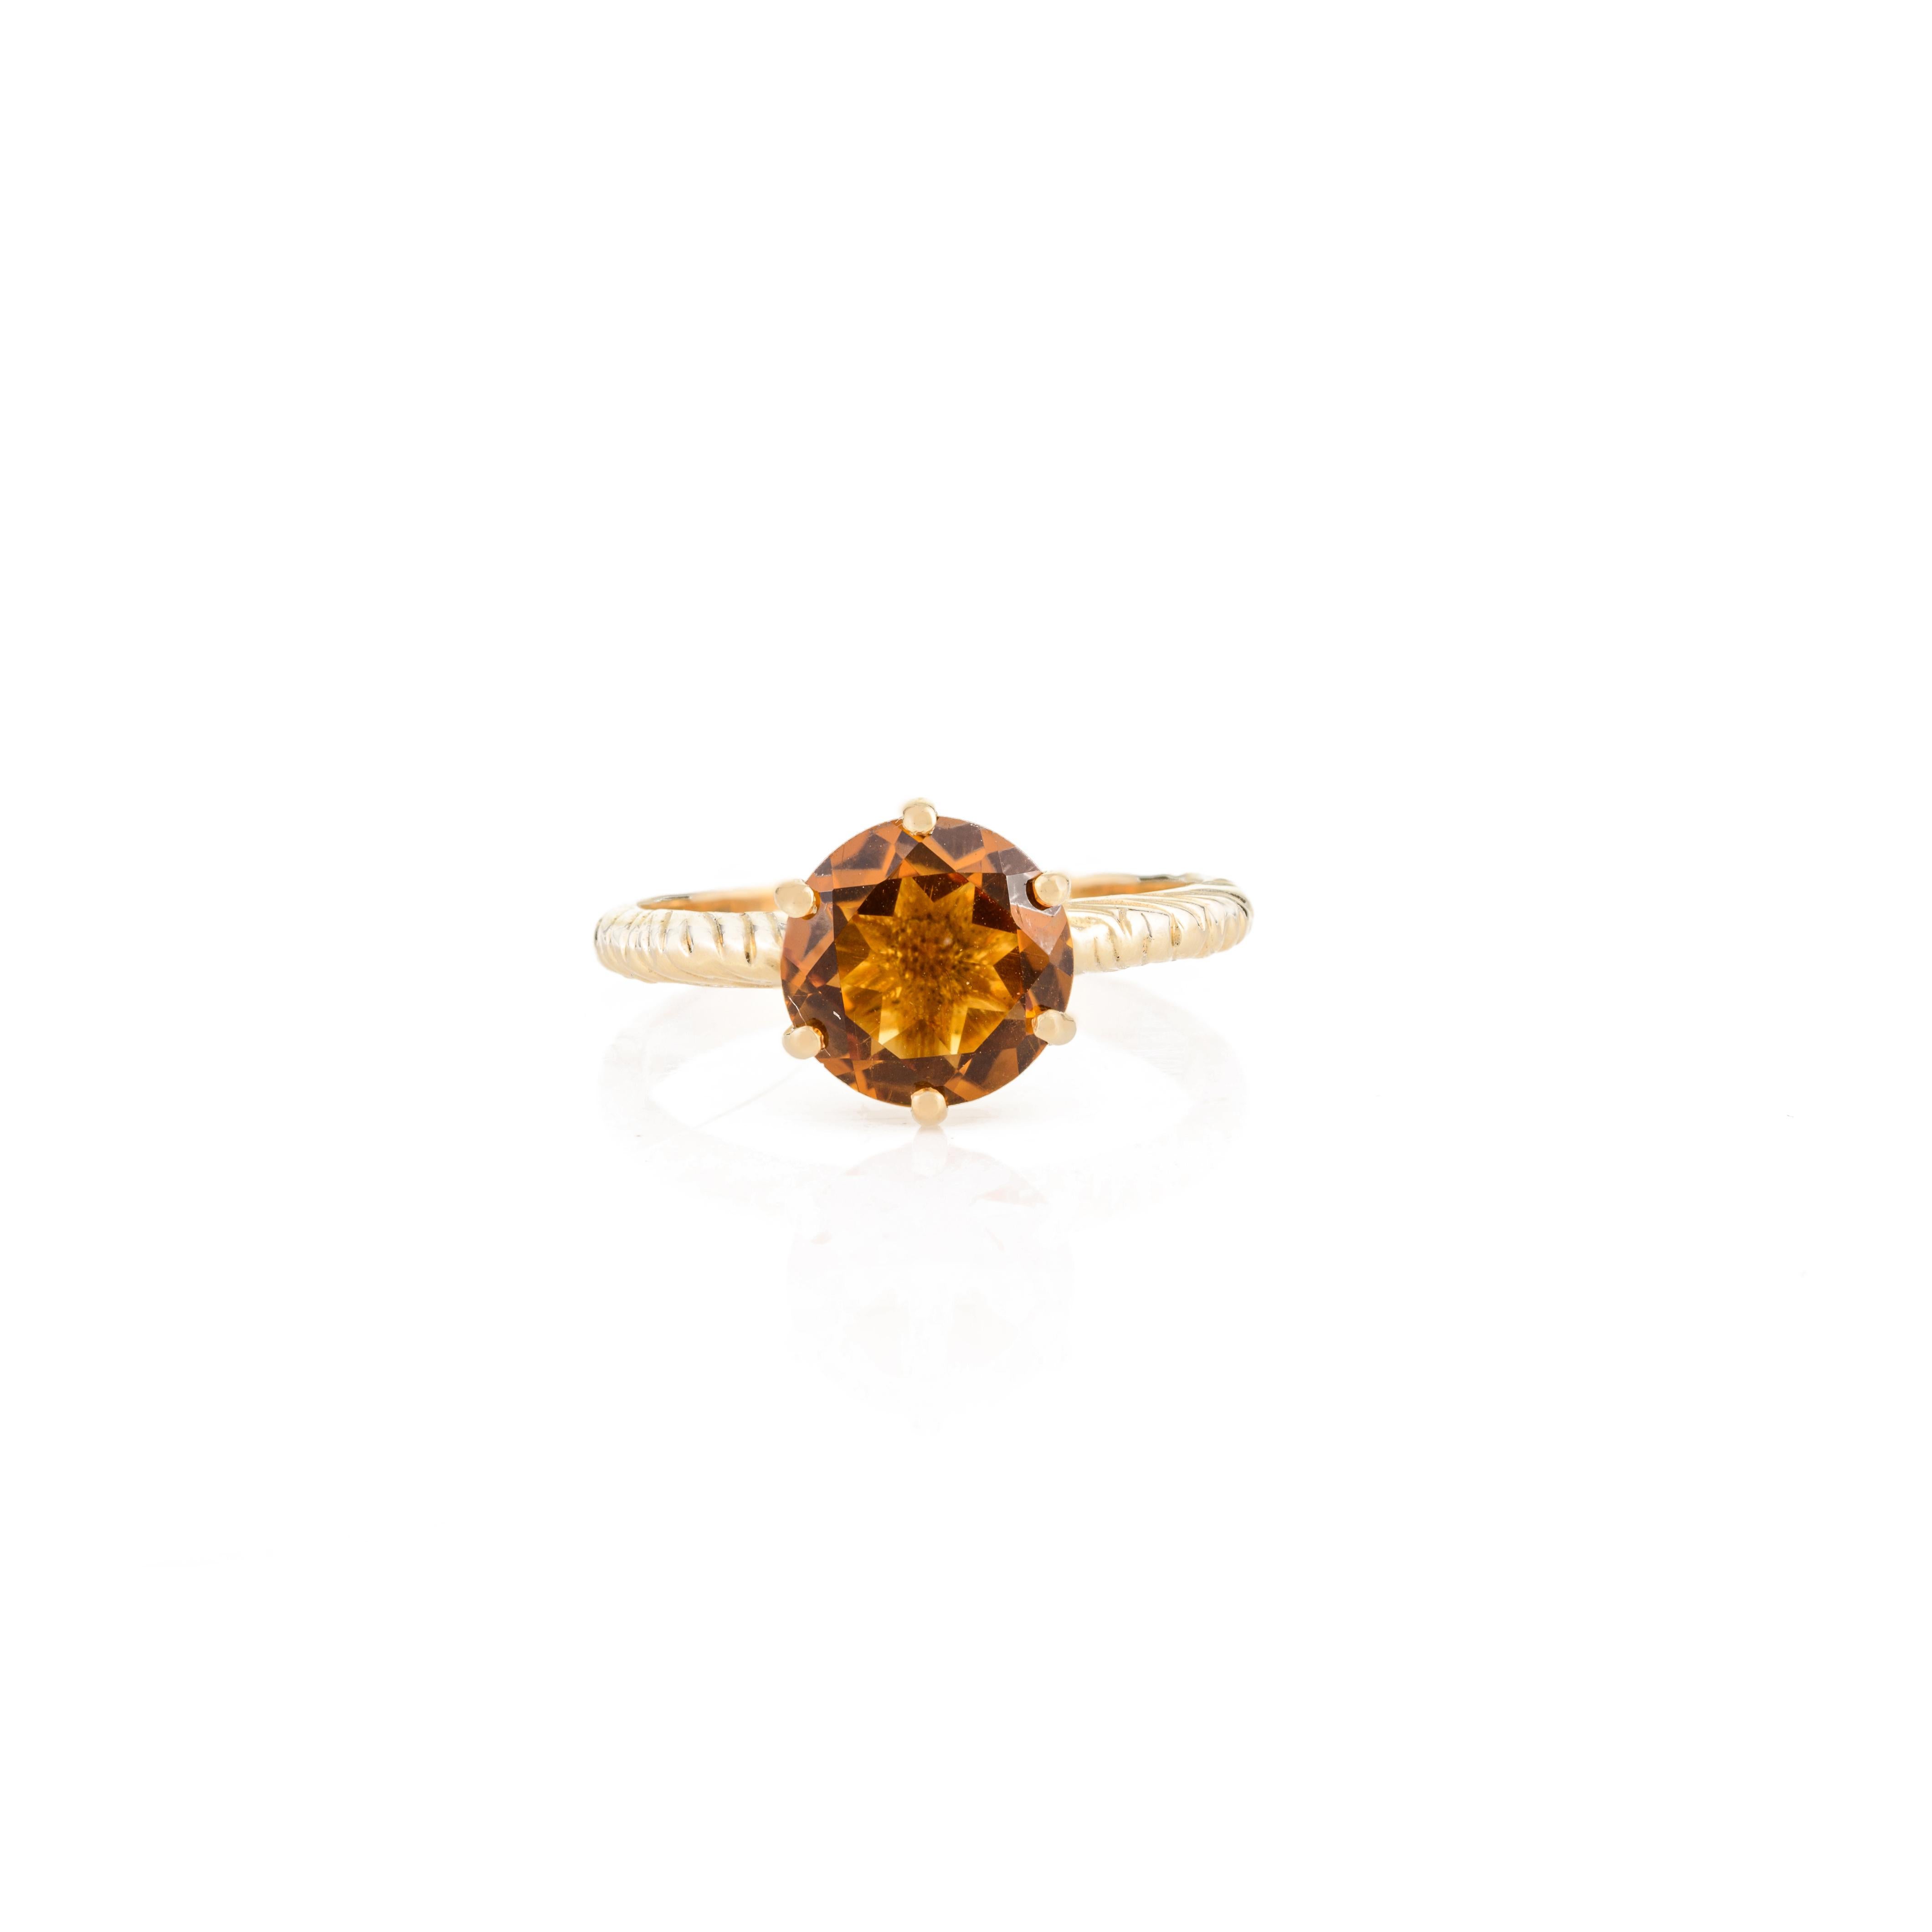 For Sale:  Round Cut Citrine Gemstone Solitaire Ring in 14k Solid Yellow Gold 5